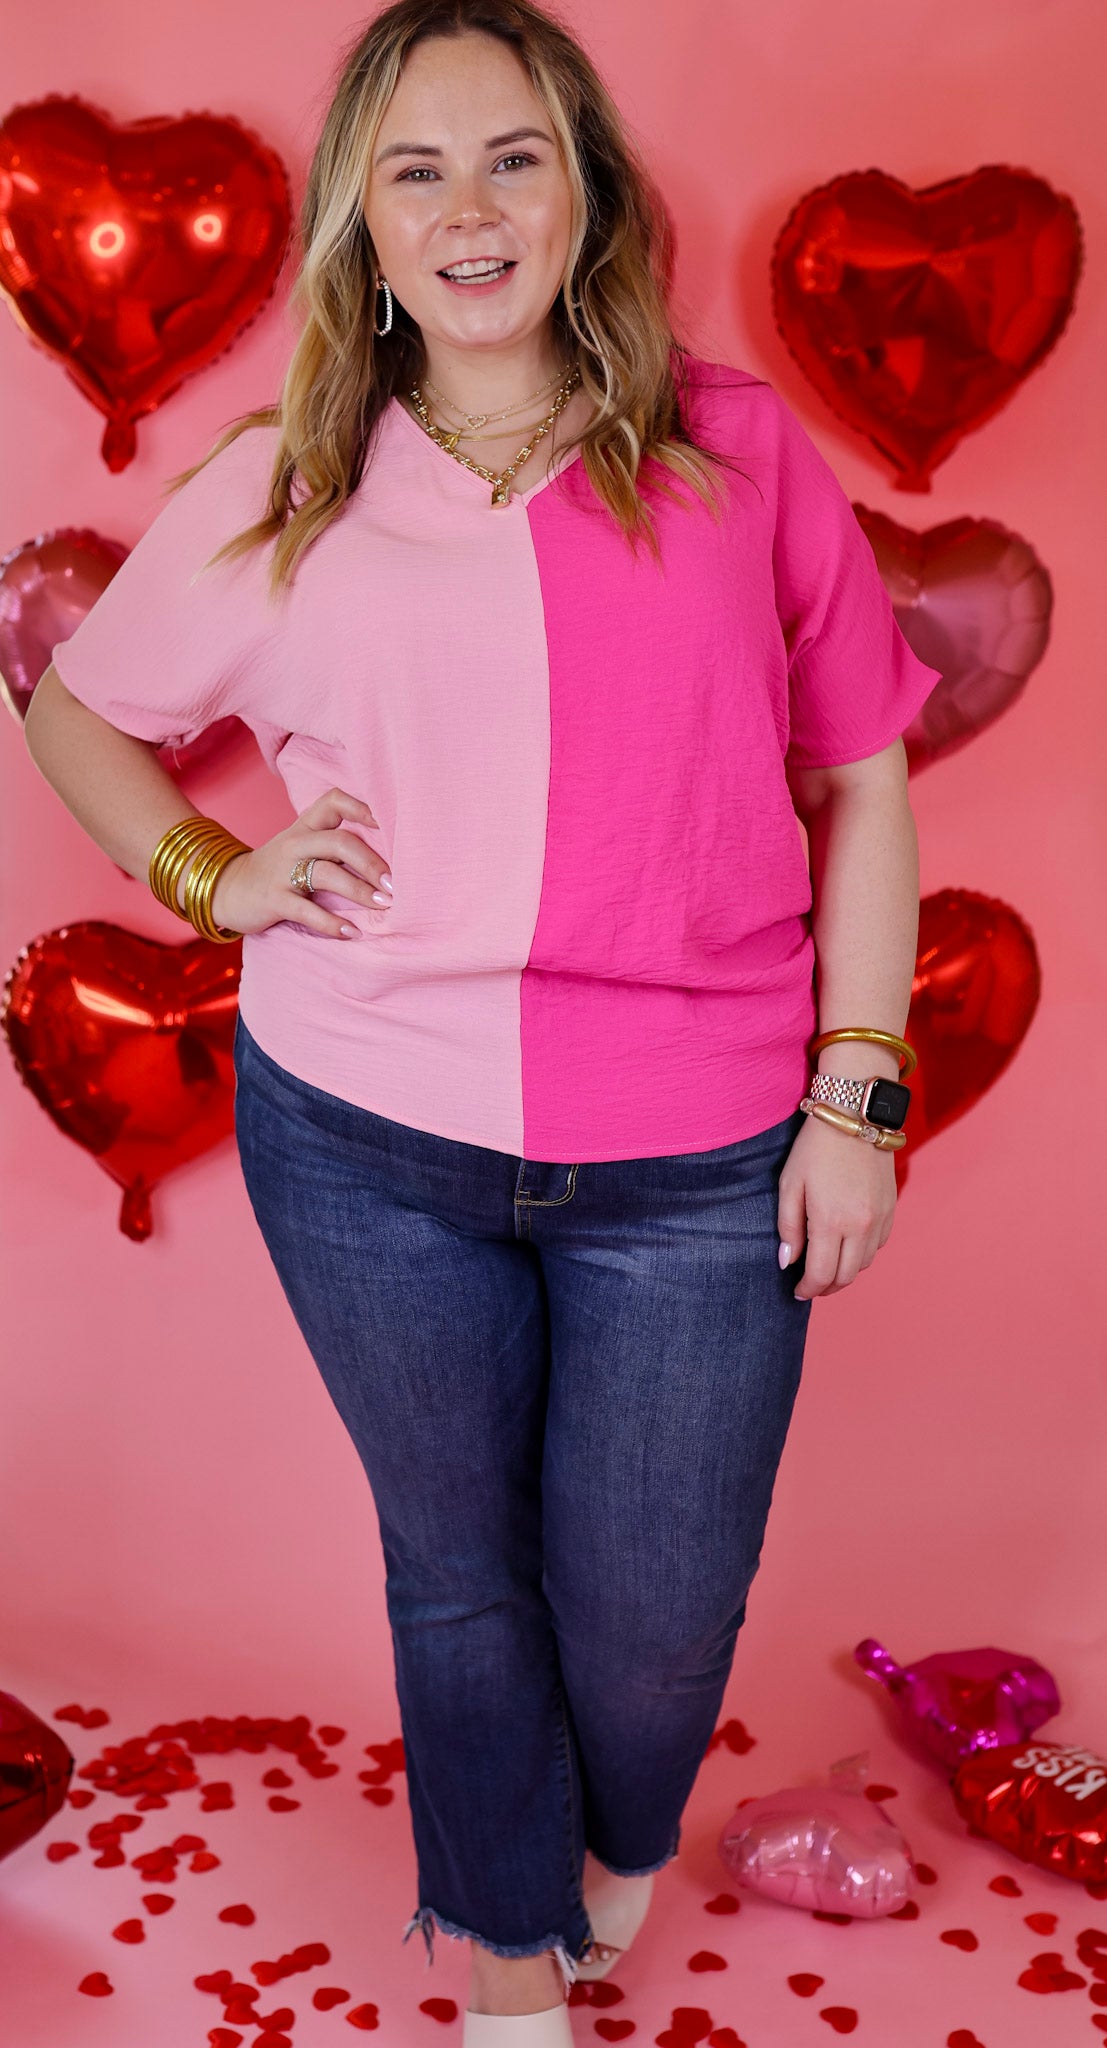 Lovely Dear V Neck Short Sleeve Color Block Top in Fuchsia and Light Pink - Giddy Up Glamour Boutique